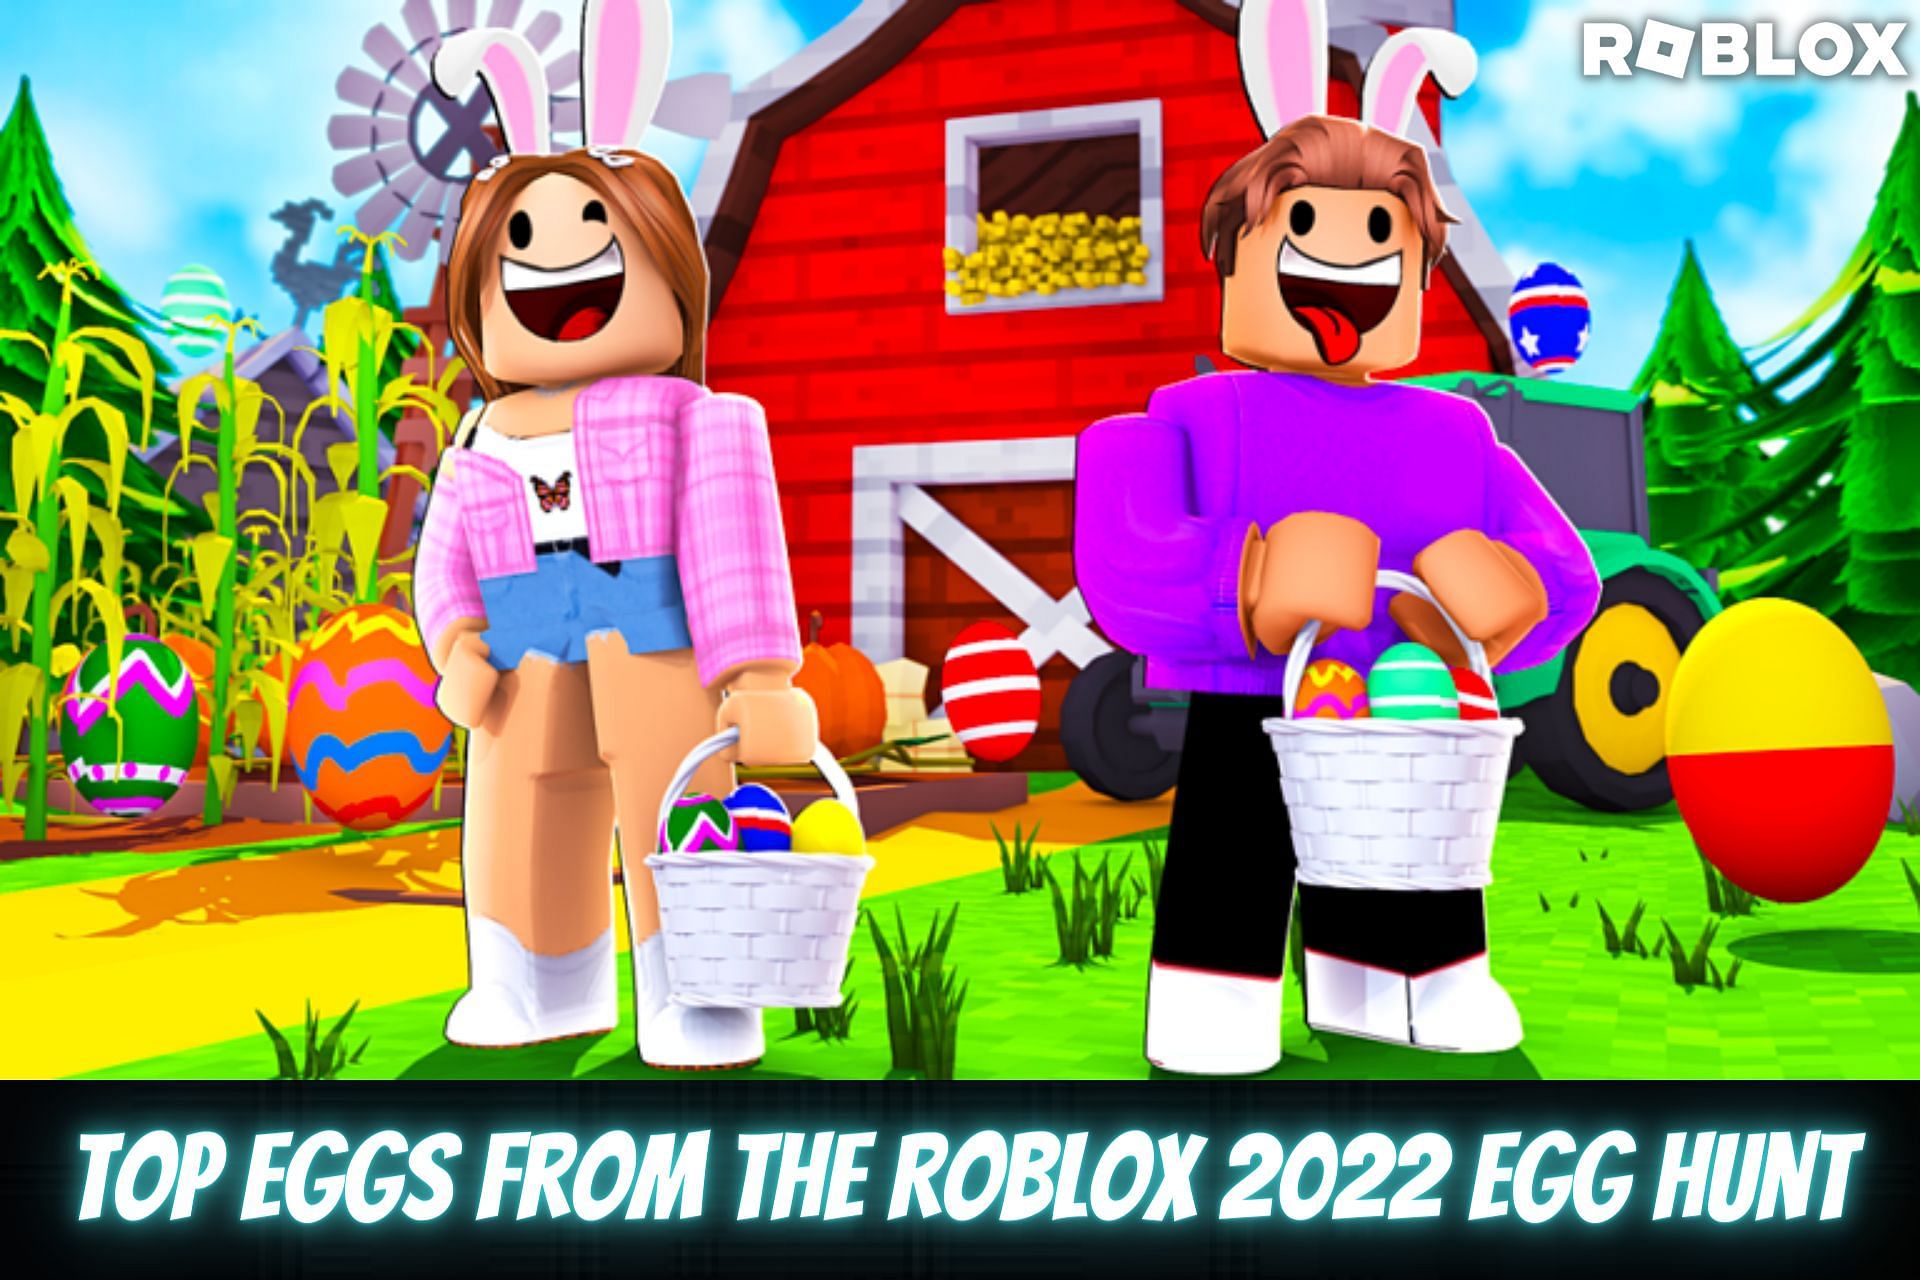 Eggs from the Roblox 2022 Egg Hunt